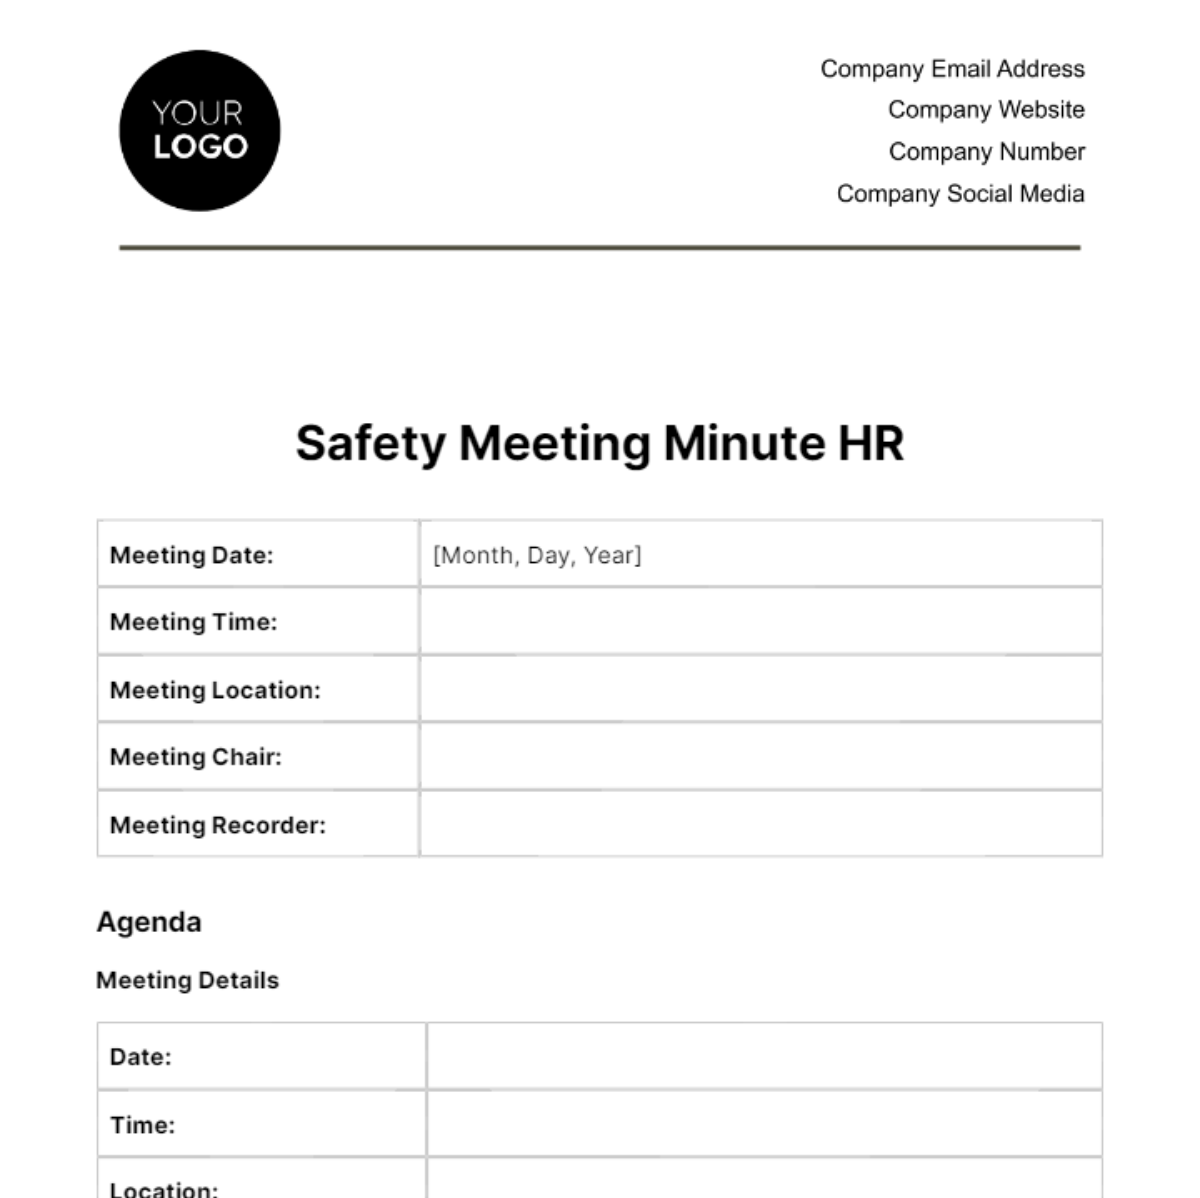 Free Safety Meeting Minute HR Template